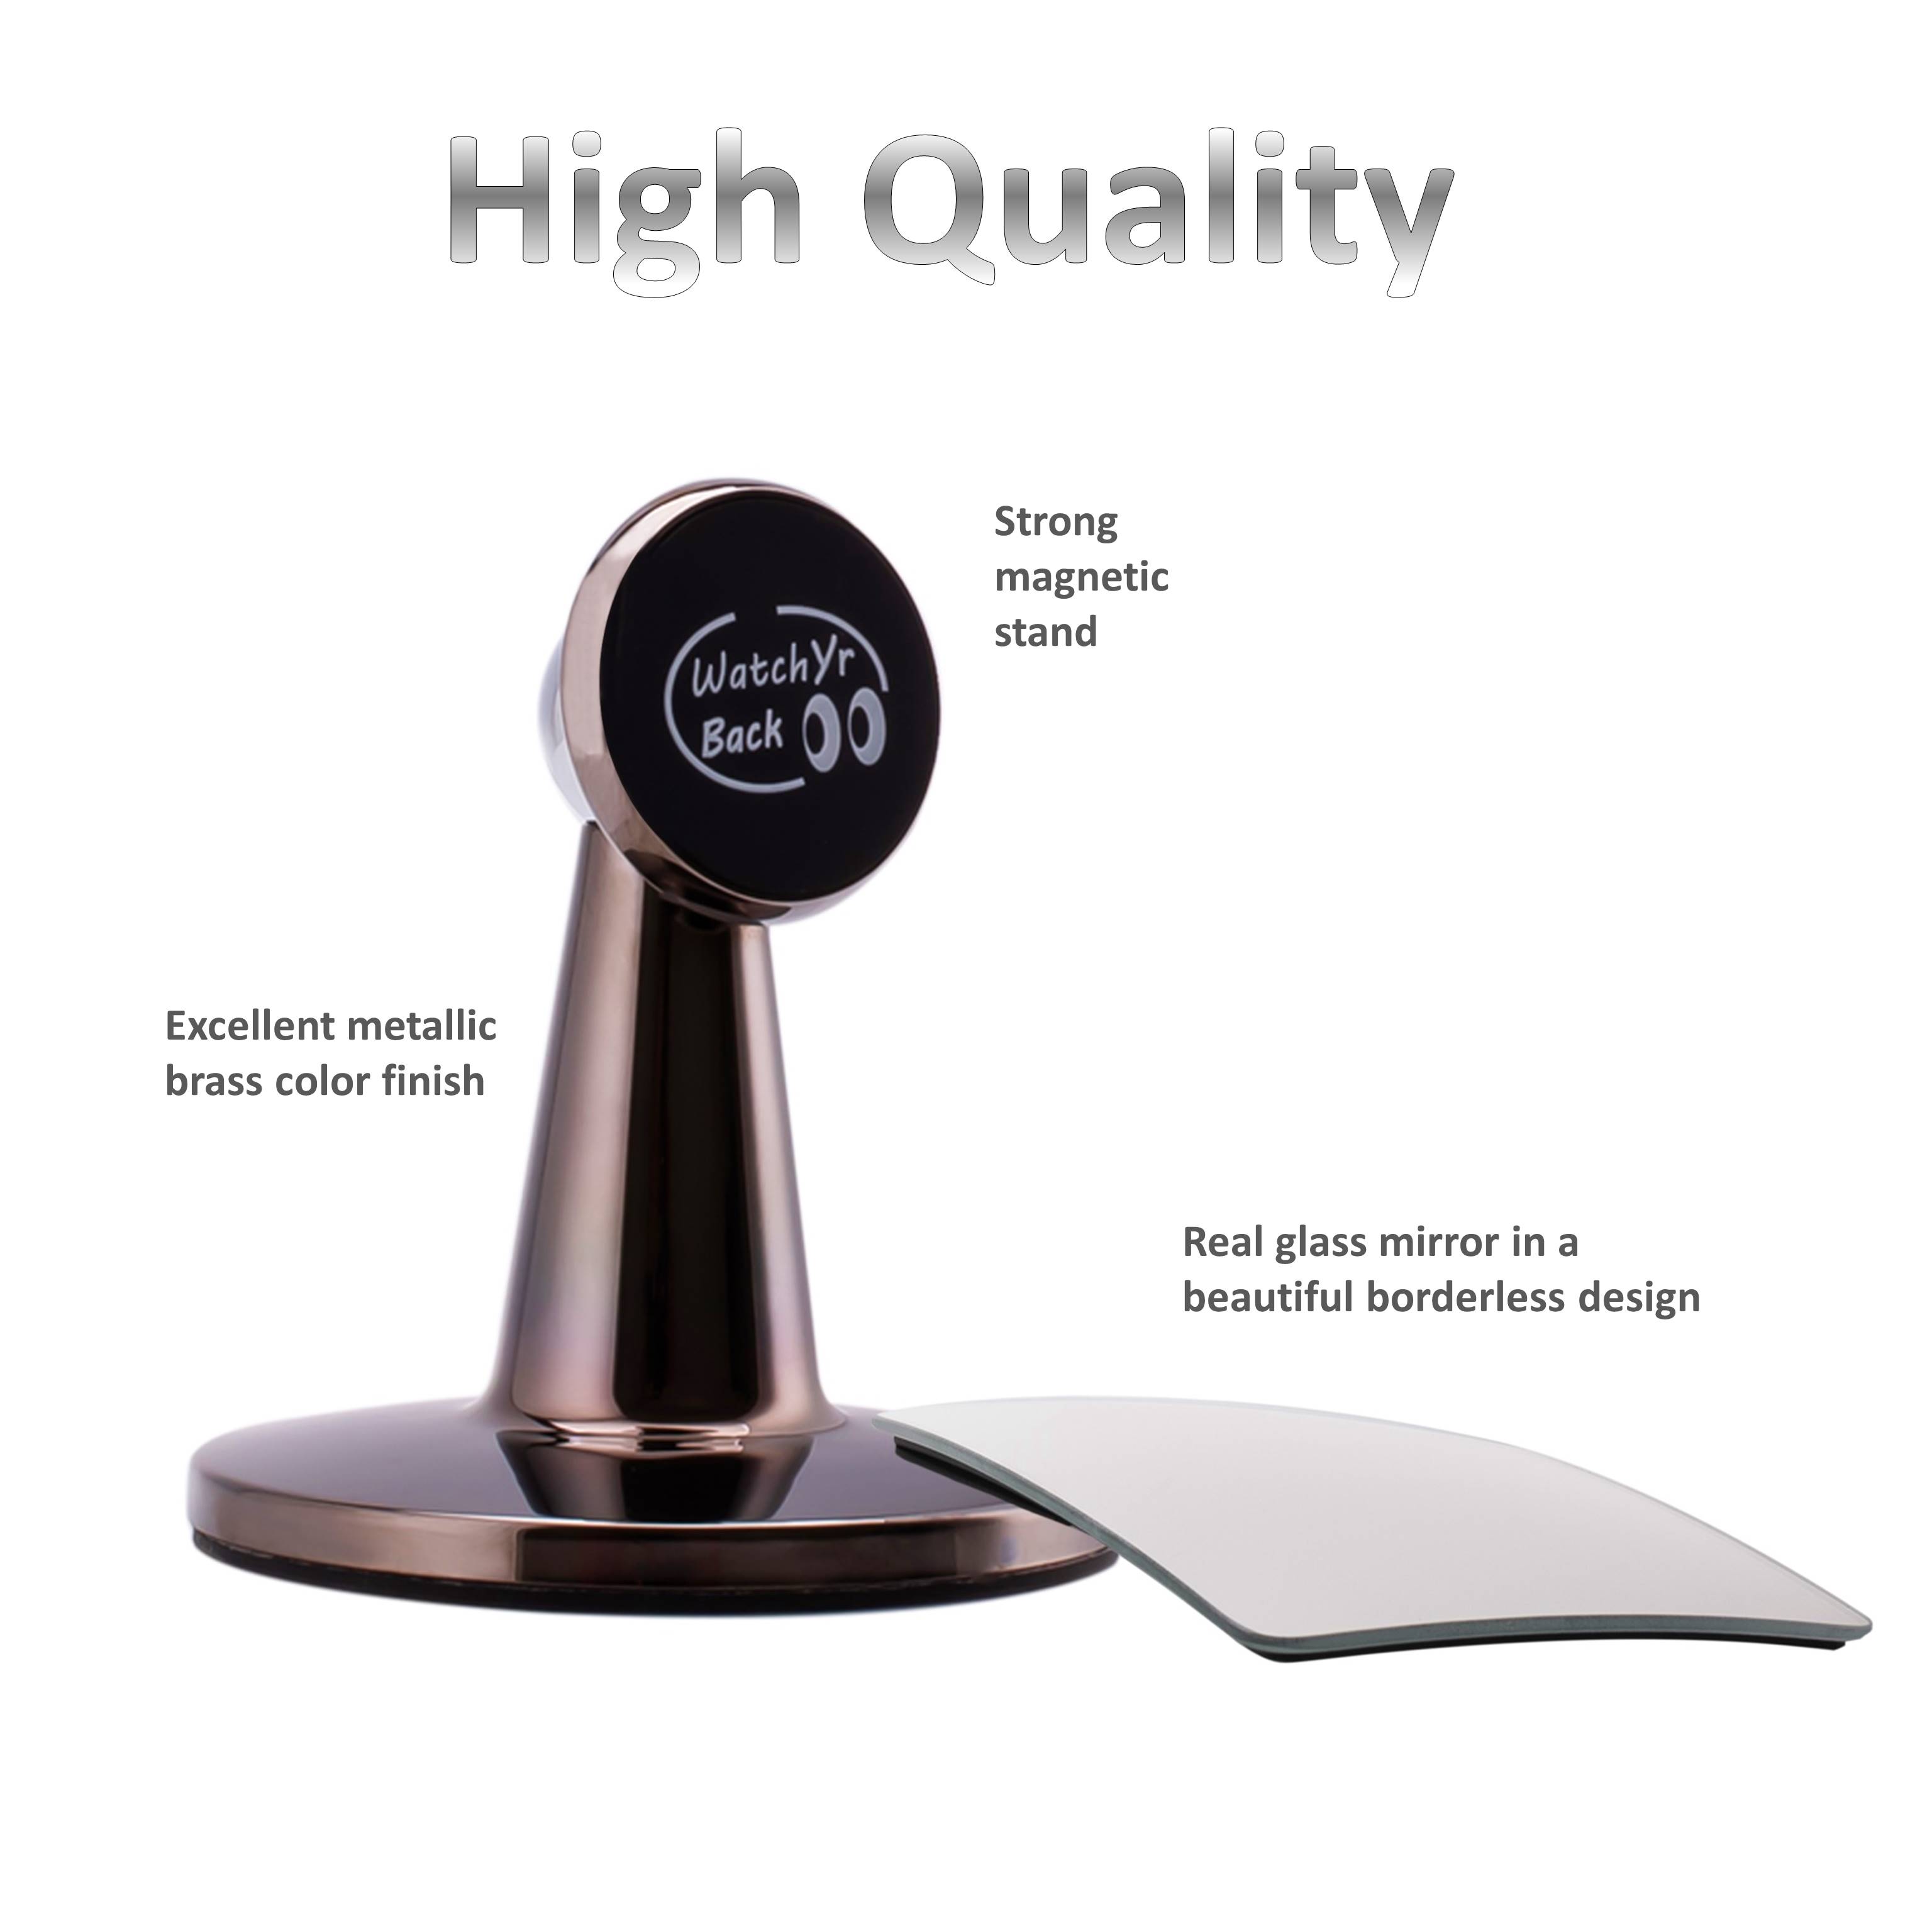 Conical Shaped Stand Mirror Productiq Llc